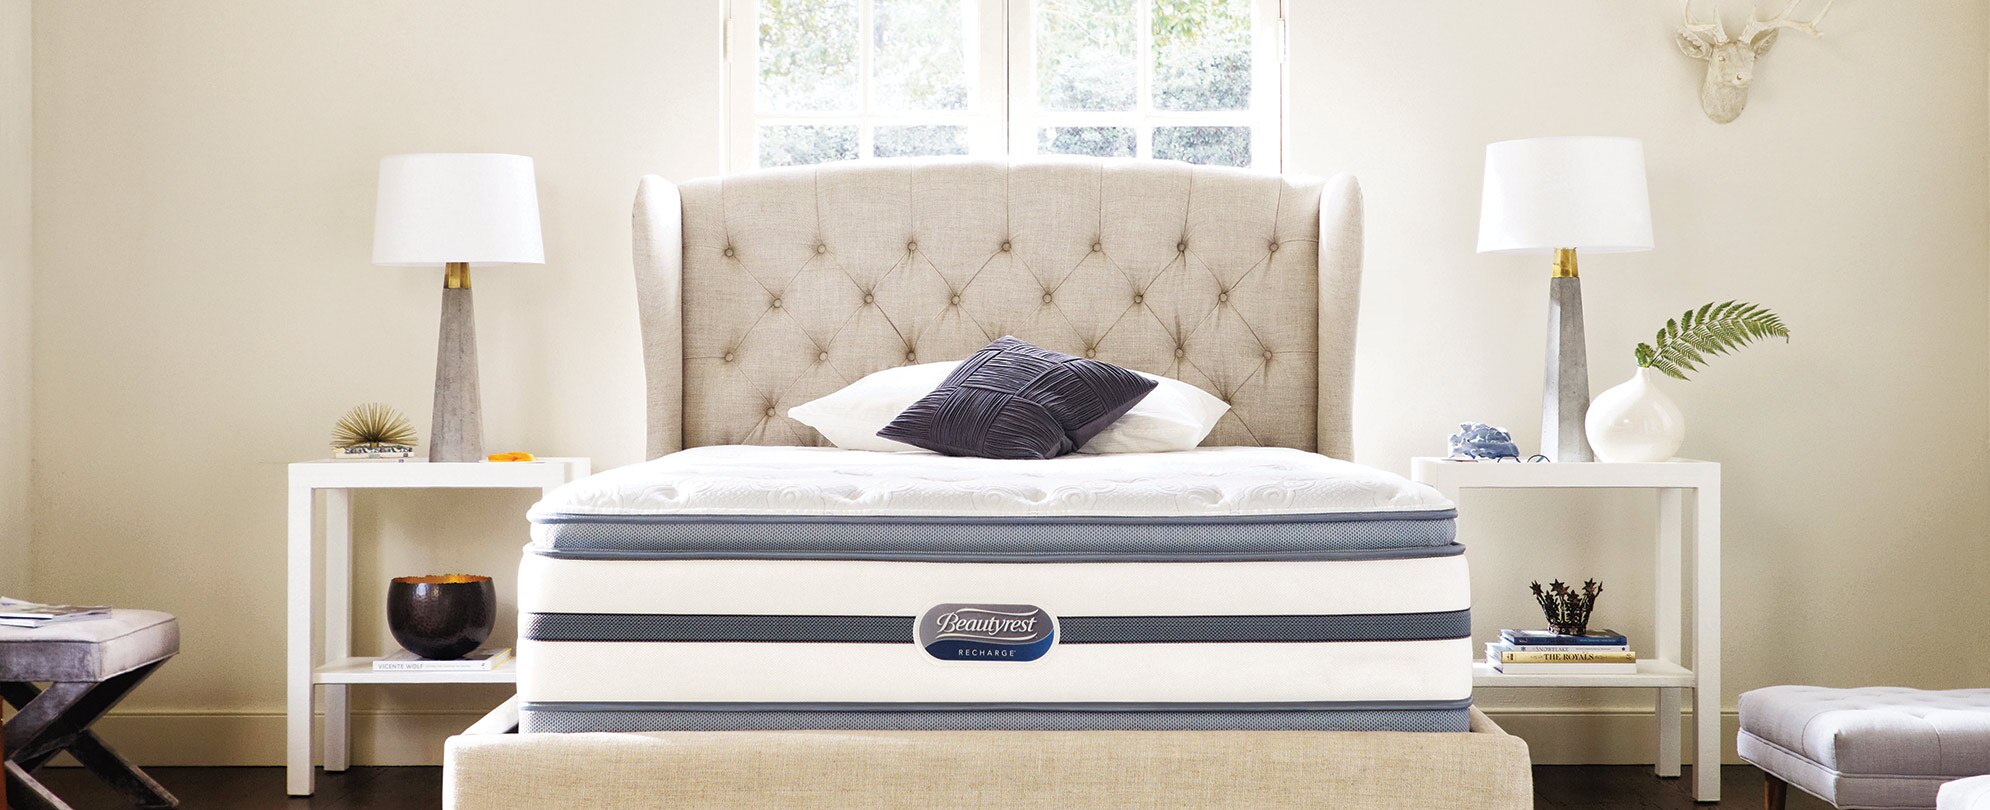 A Beautyrest mattress on an upholstered bed frame,  sold at WorldMark The Store.